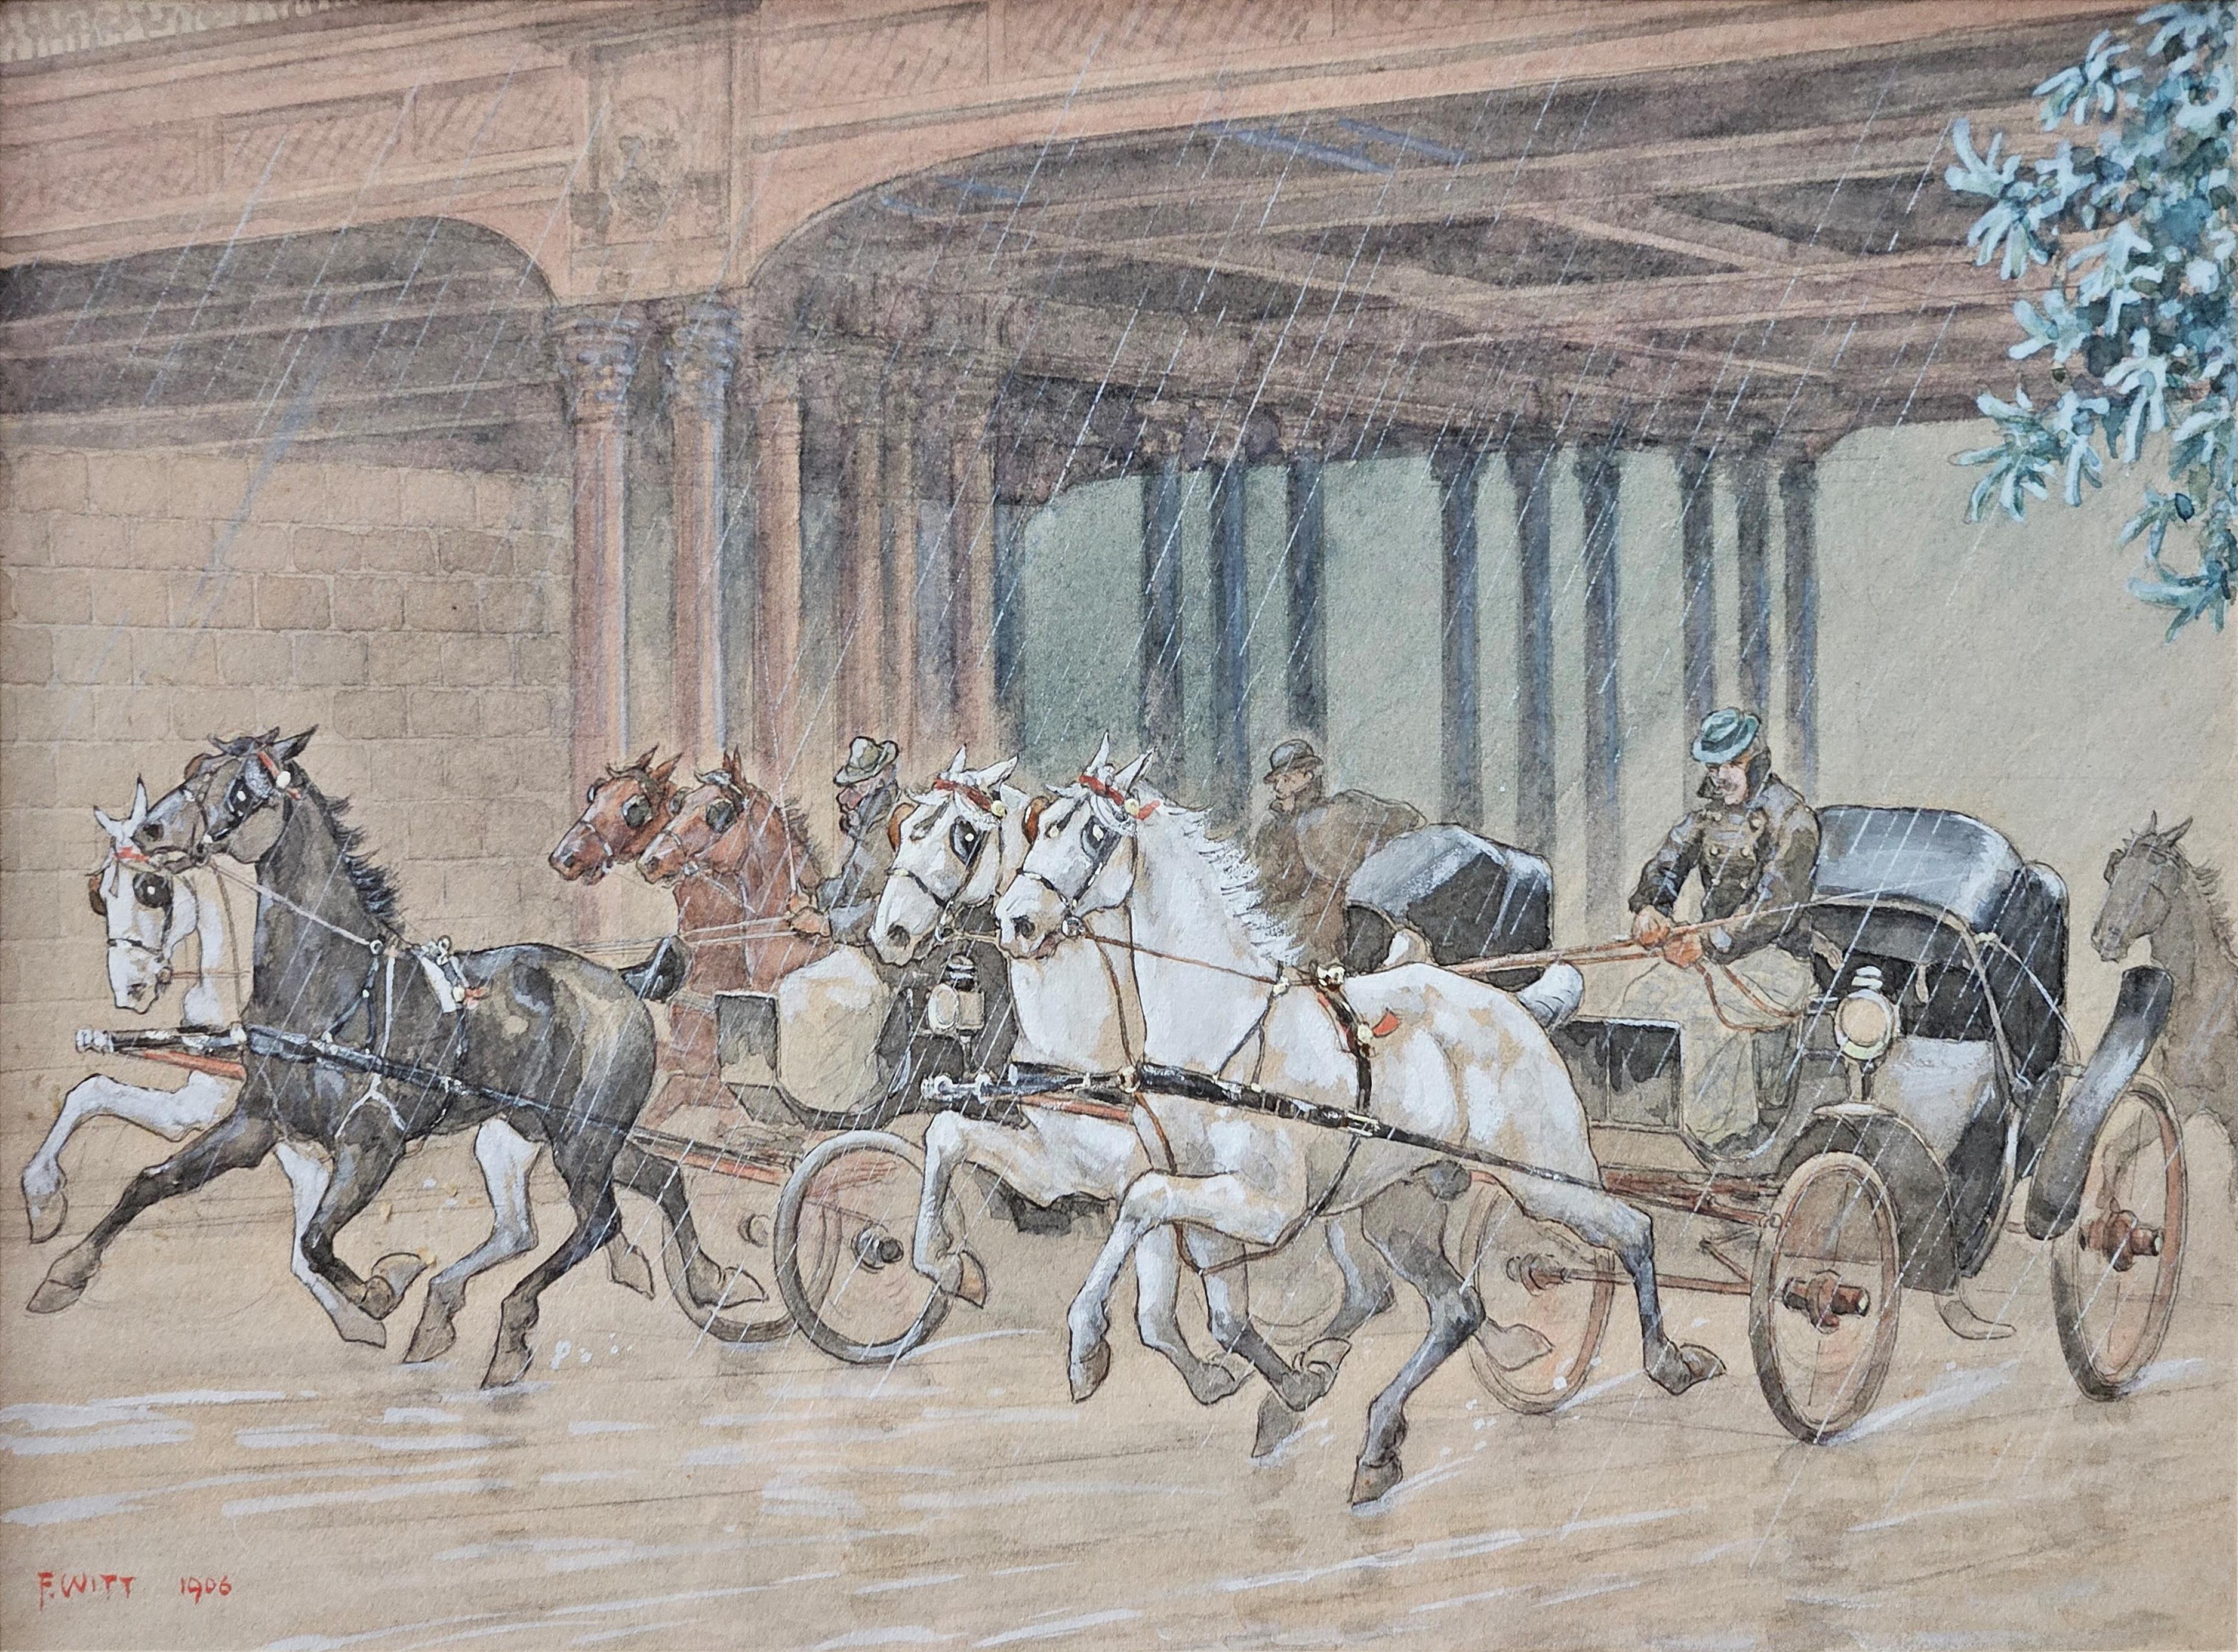 Two-horse and one-horse cariage races, signed Franz Witt (Schloß Mähren 1864 - ?).
Pencil, watercolor, opaque white on cardboard.
28 cm x 18 cm